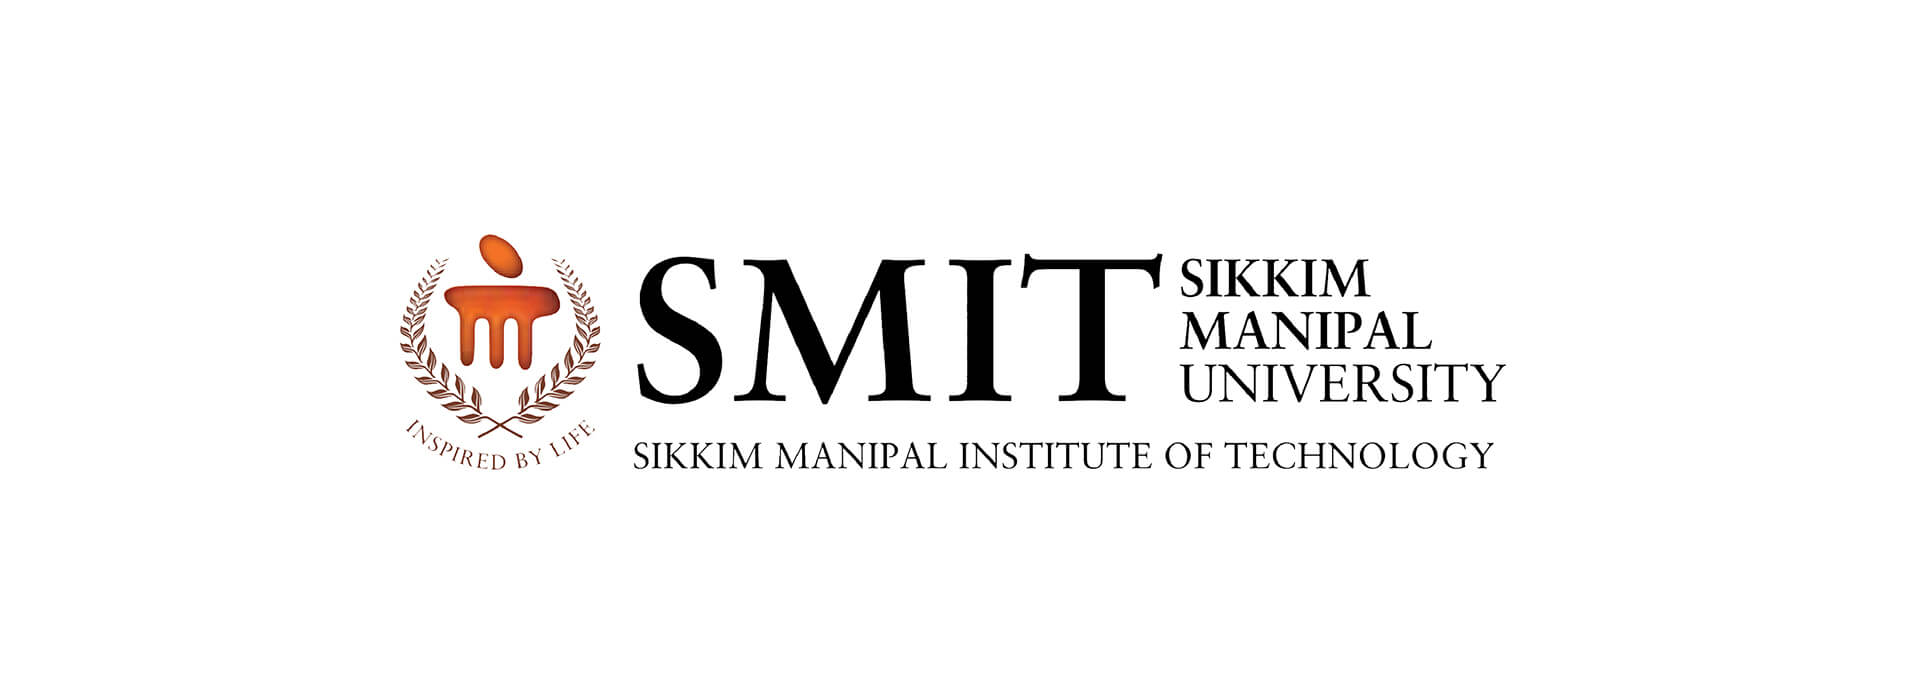 Sikkim Manipal institute of technology banner